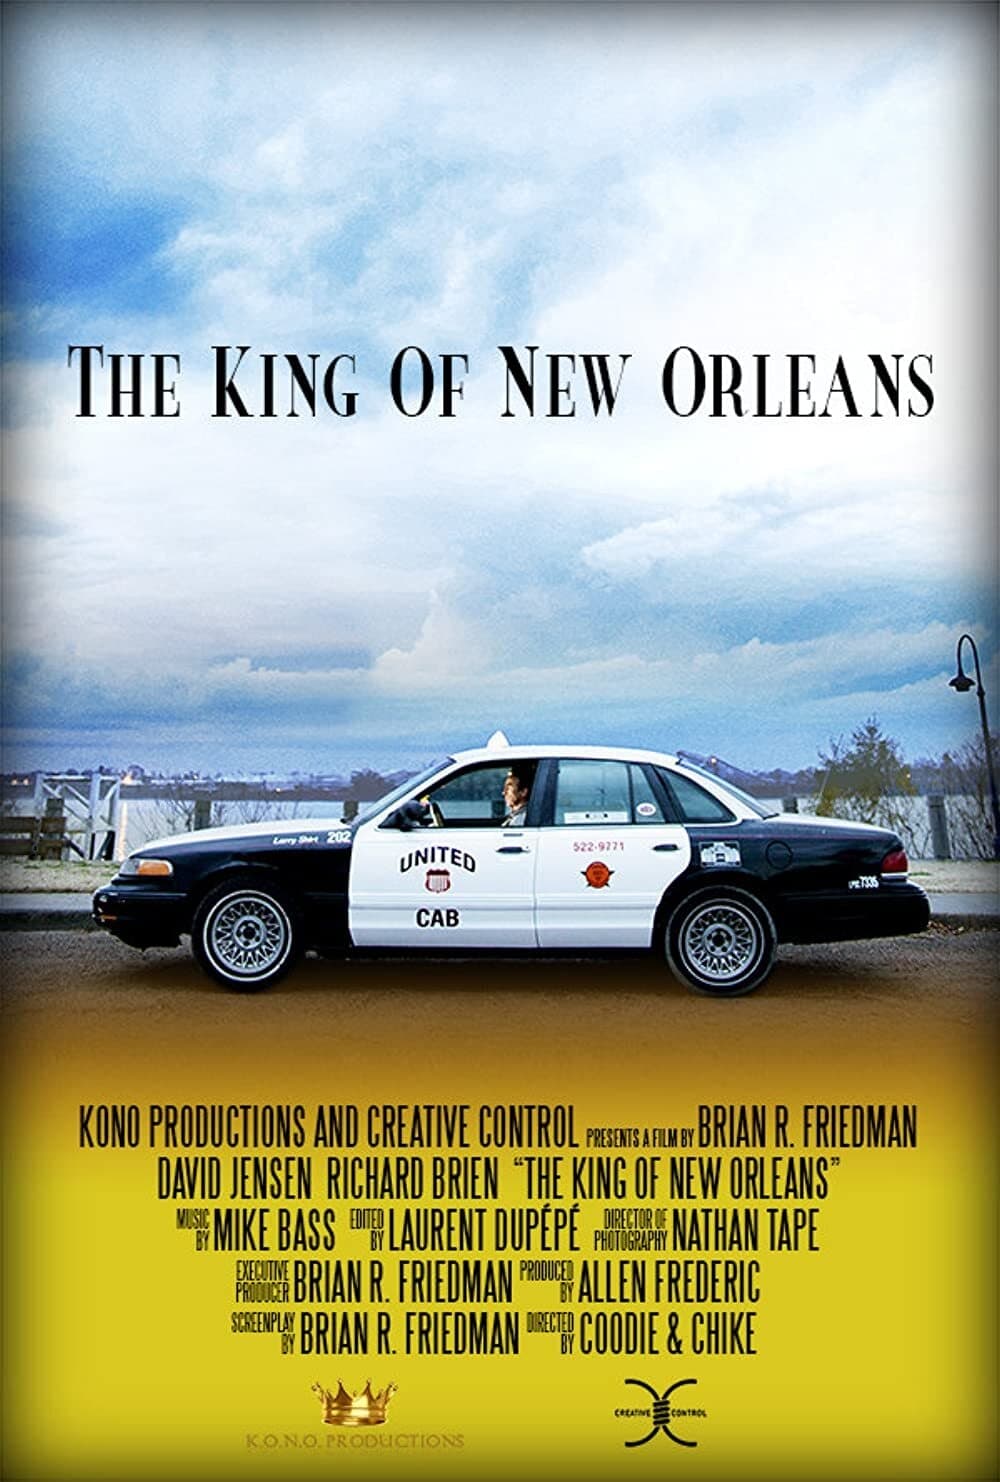 The King of New Orleans